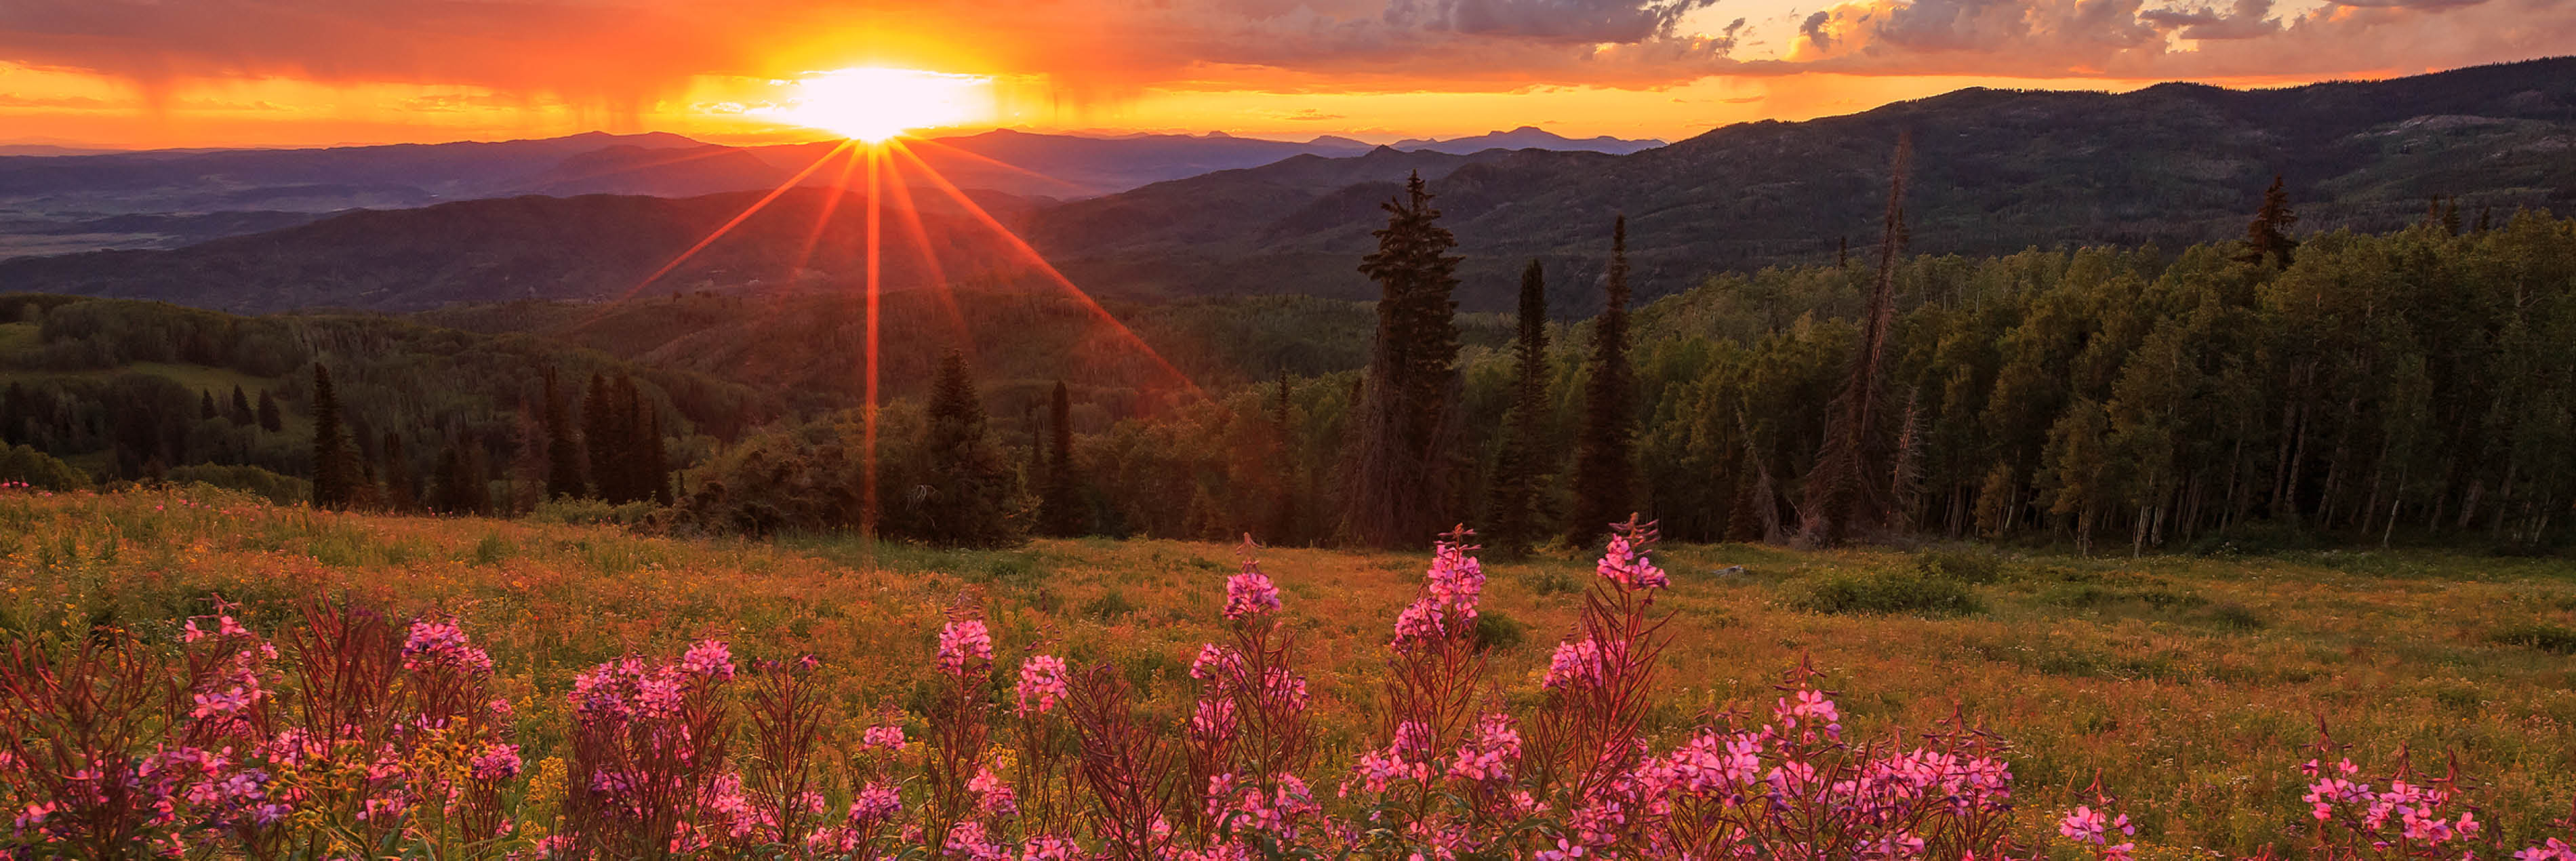 sun setting over pink flowers